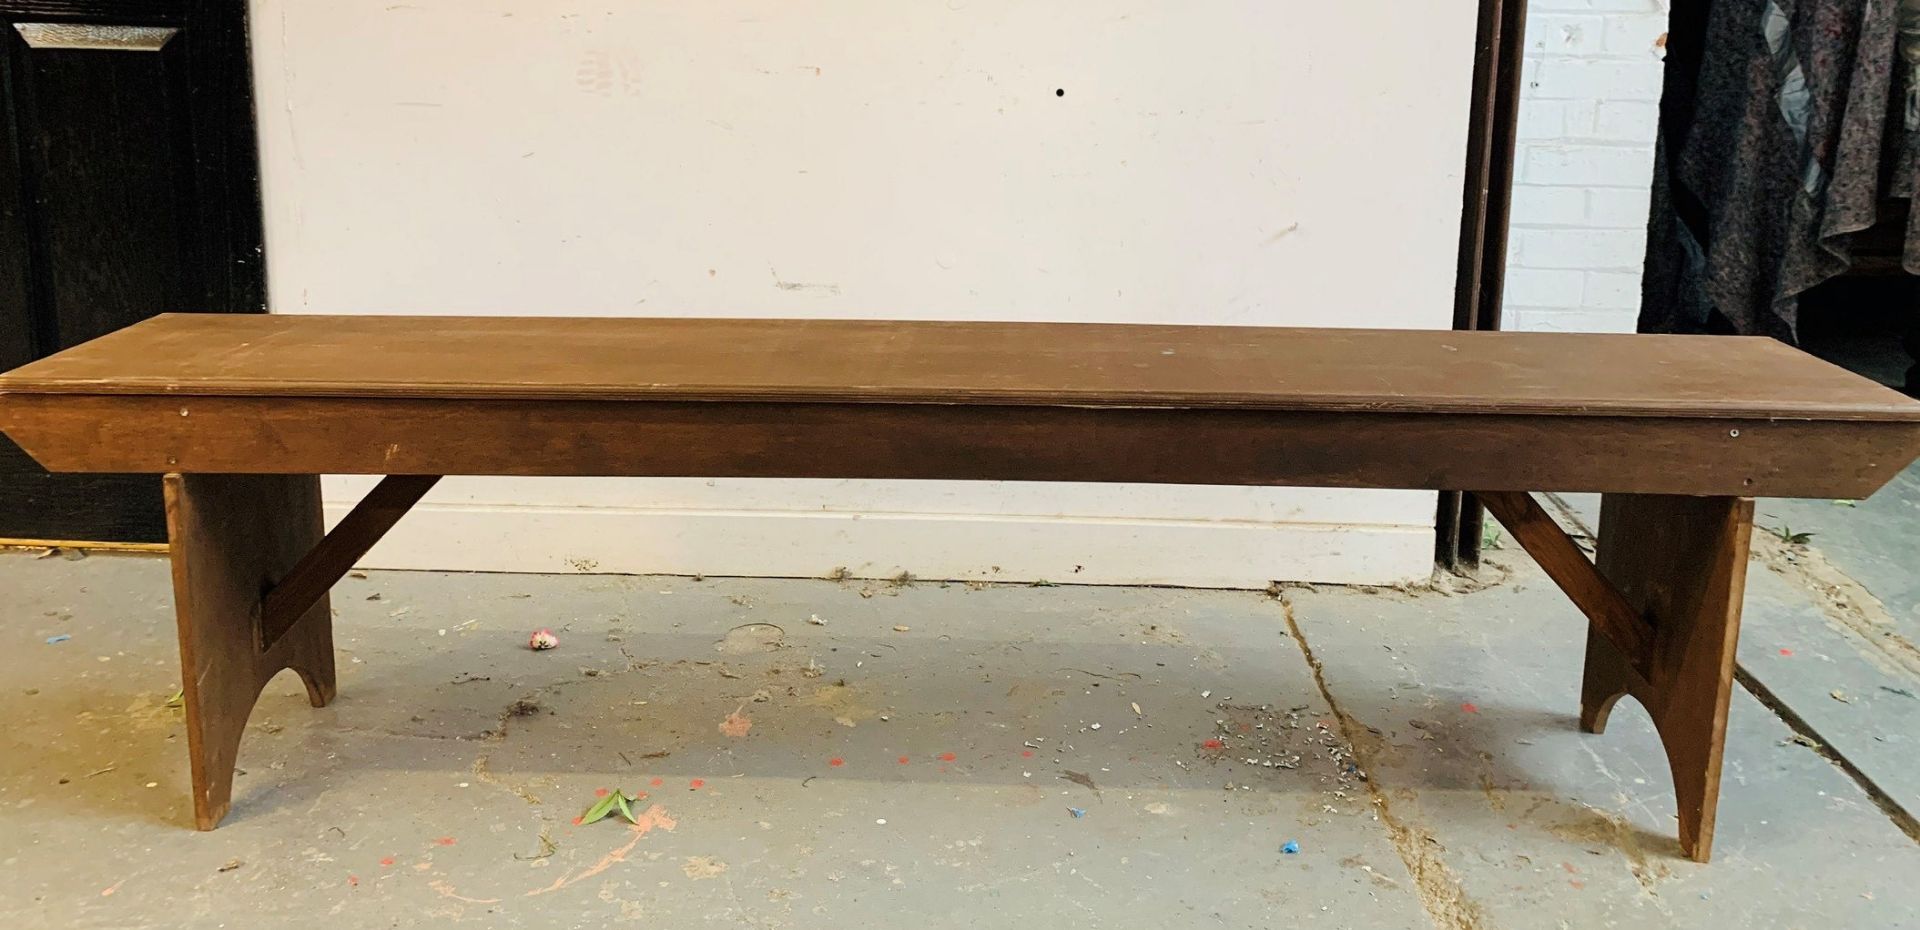 10 x 1.8m Wooden Benches - Dimensions: 183x47x30cm - Ref: Lot 49 - CL548 - Location: Near Oadby,